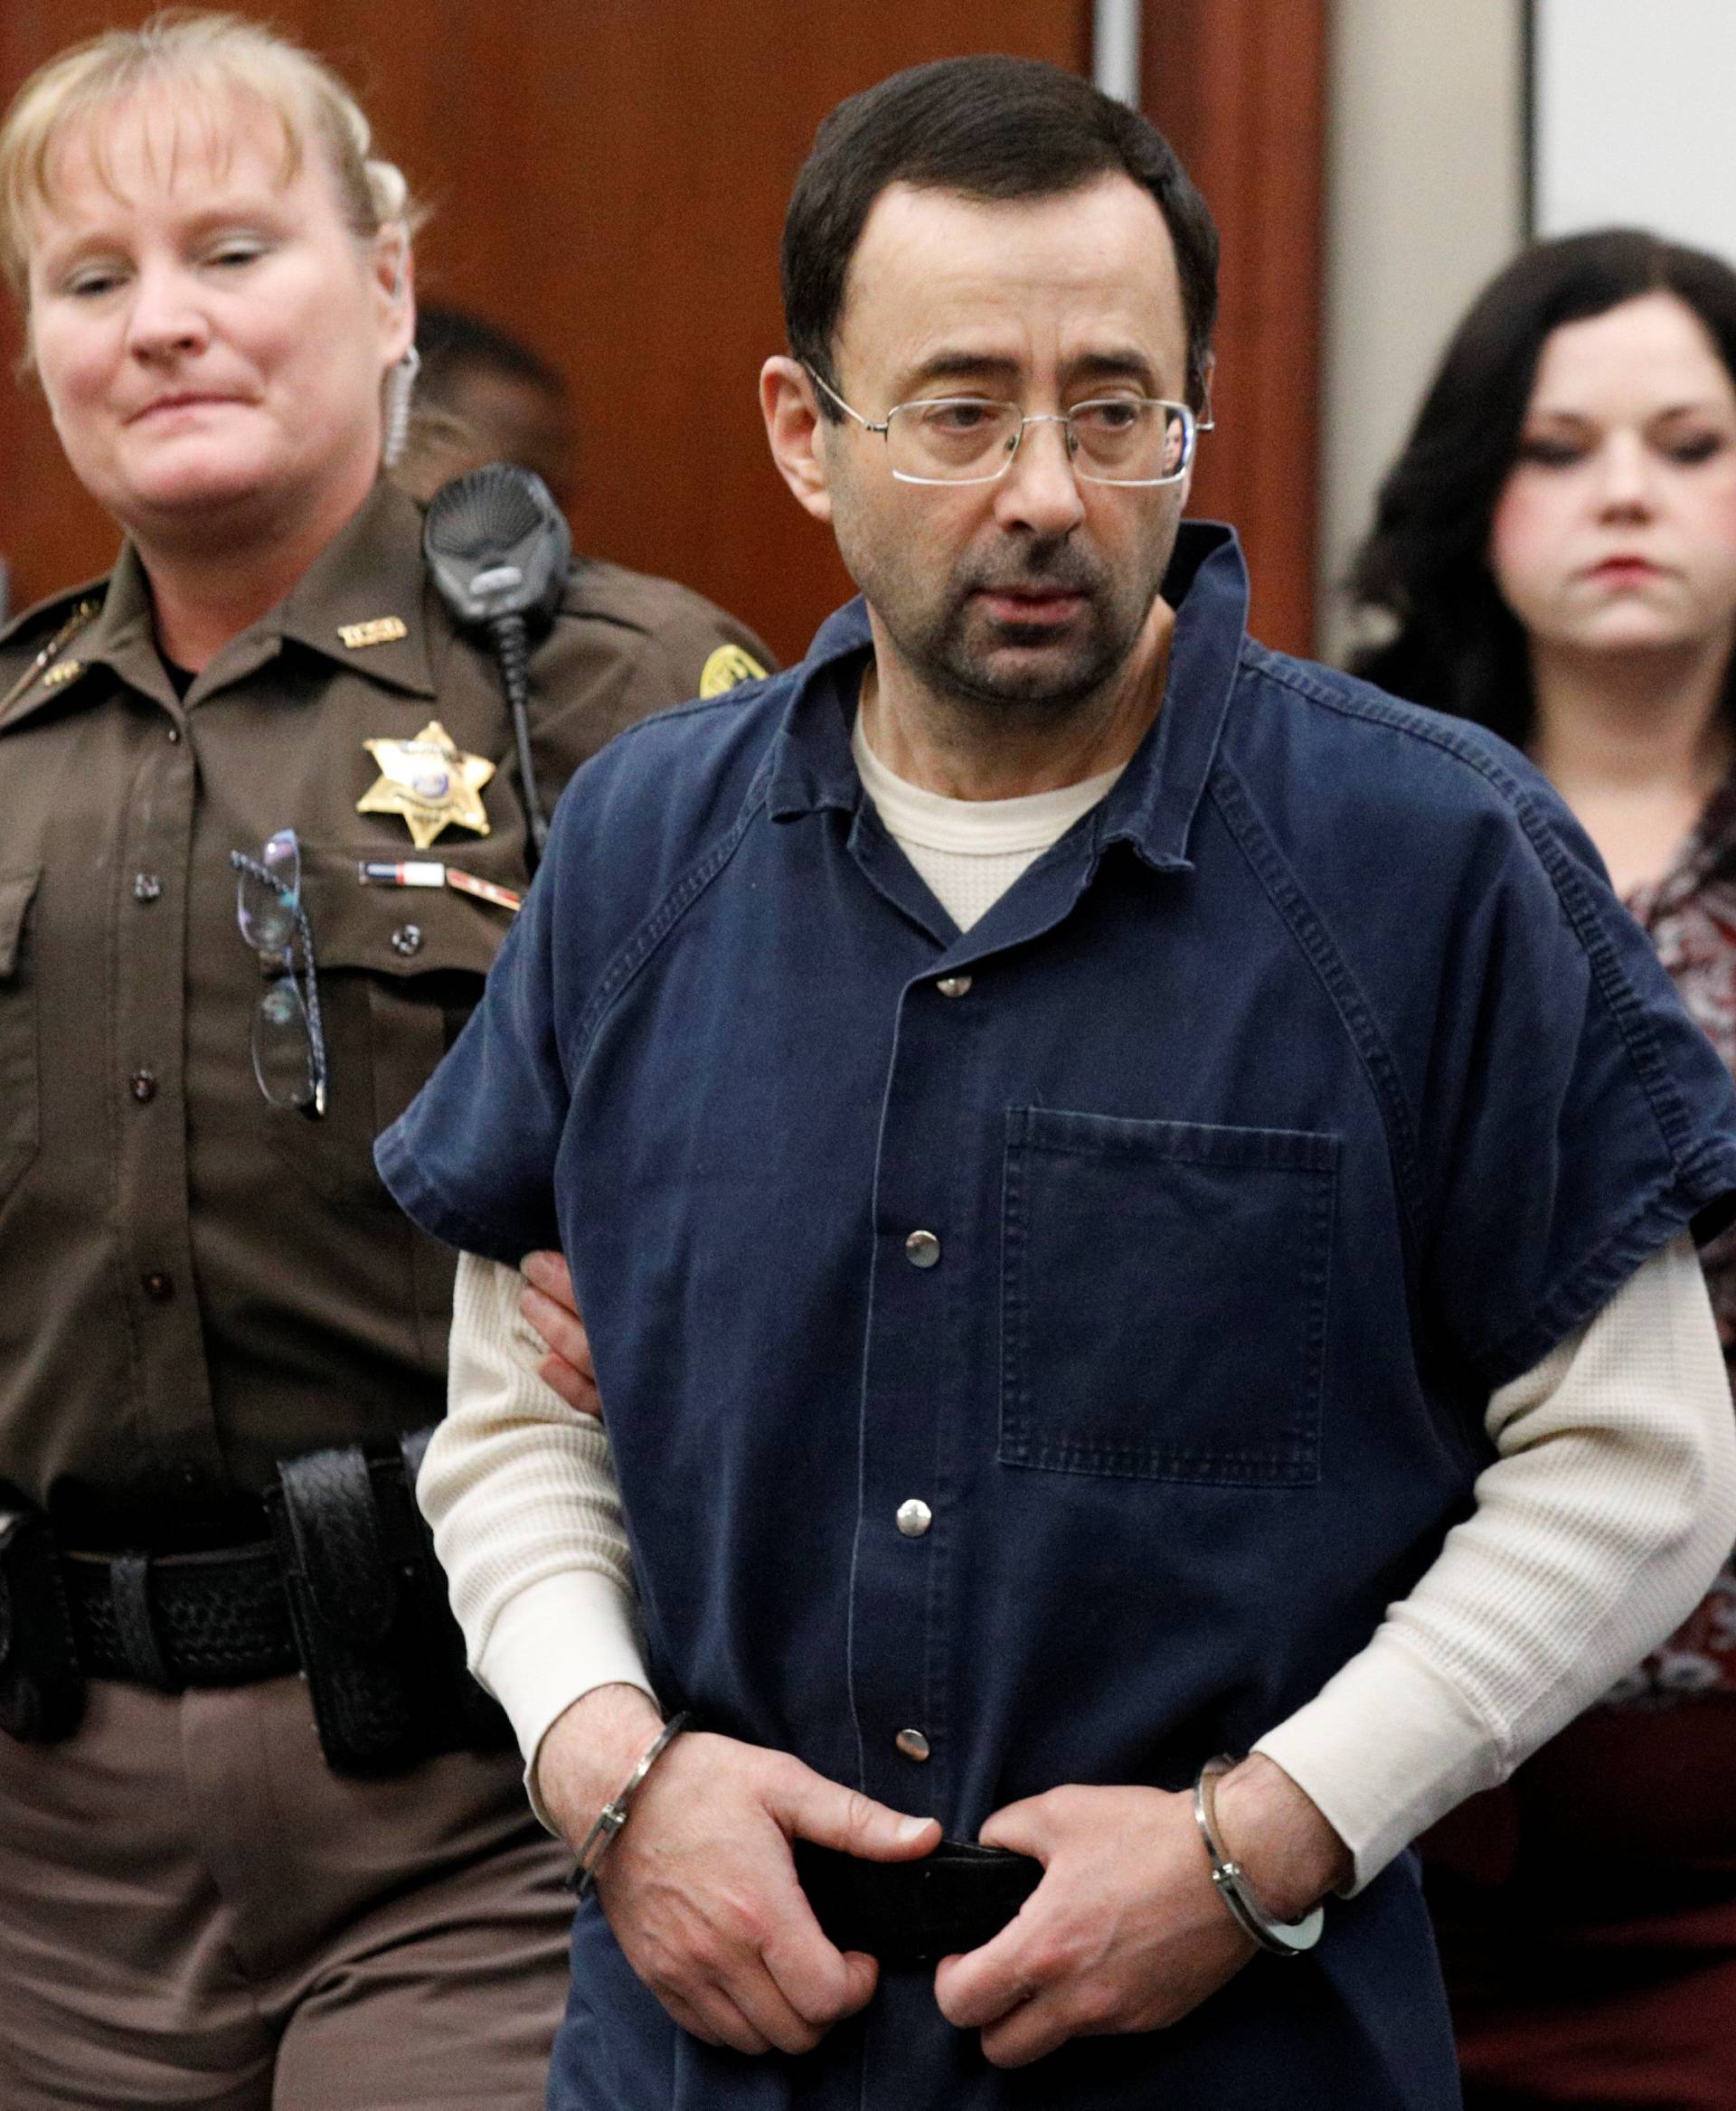 Larry Nassar, a former team USA Gymnastics doctor, who pleaded guilty in November 2017 to sexual assault charges, is escorted into the courtroom during his sentencing hearing in Lansing